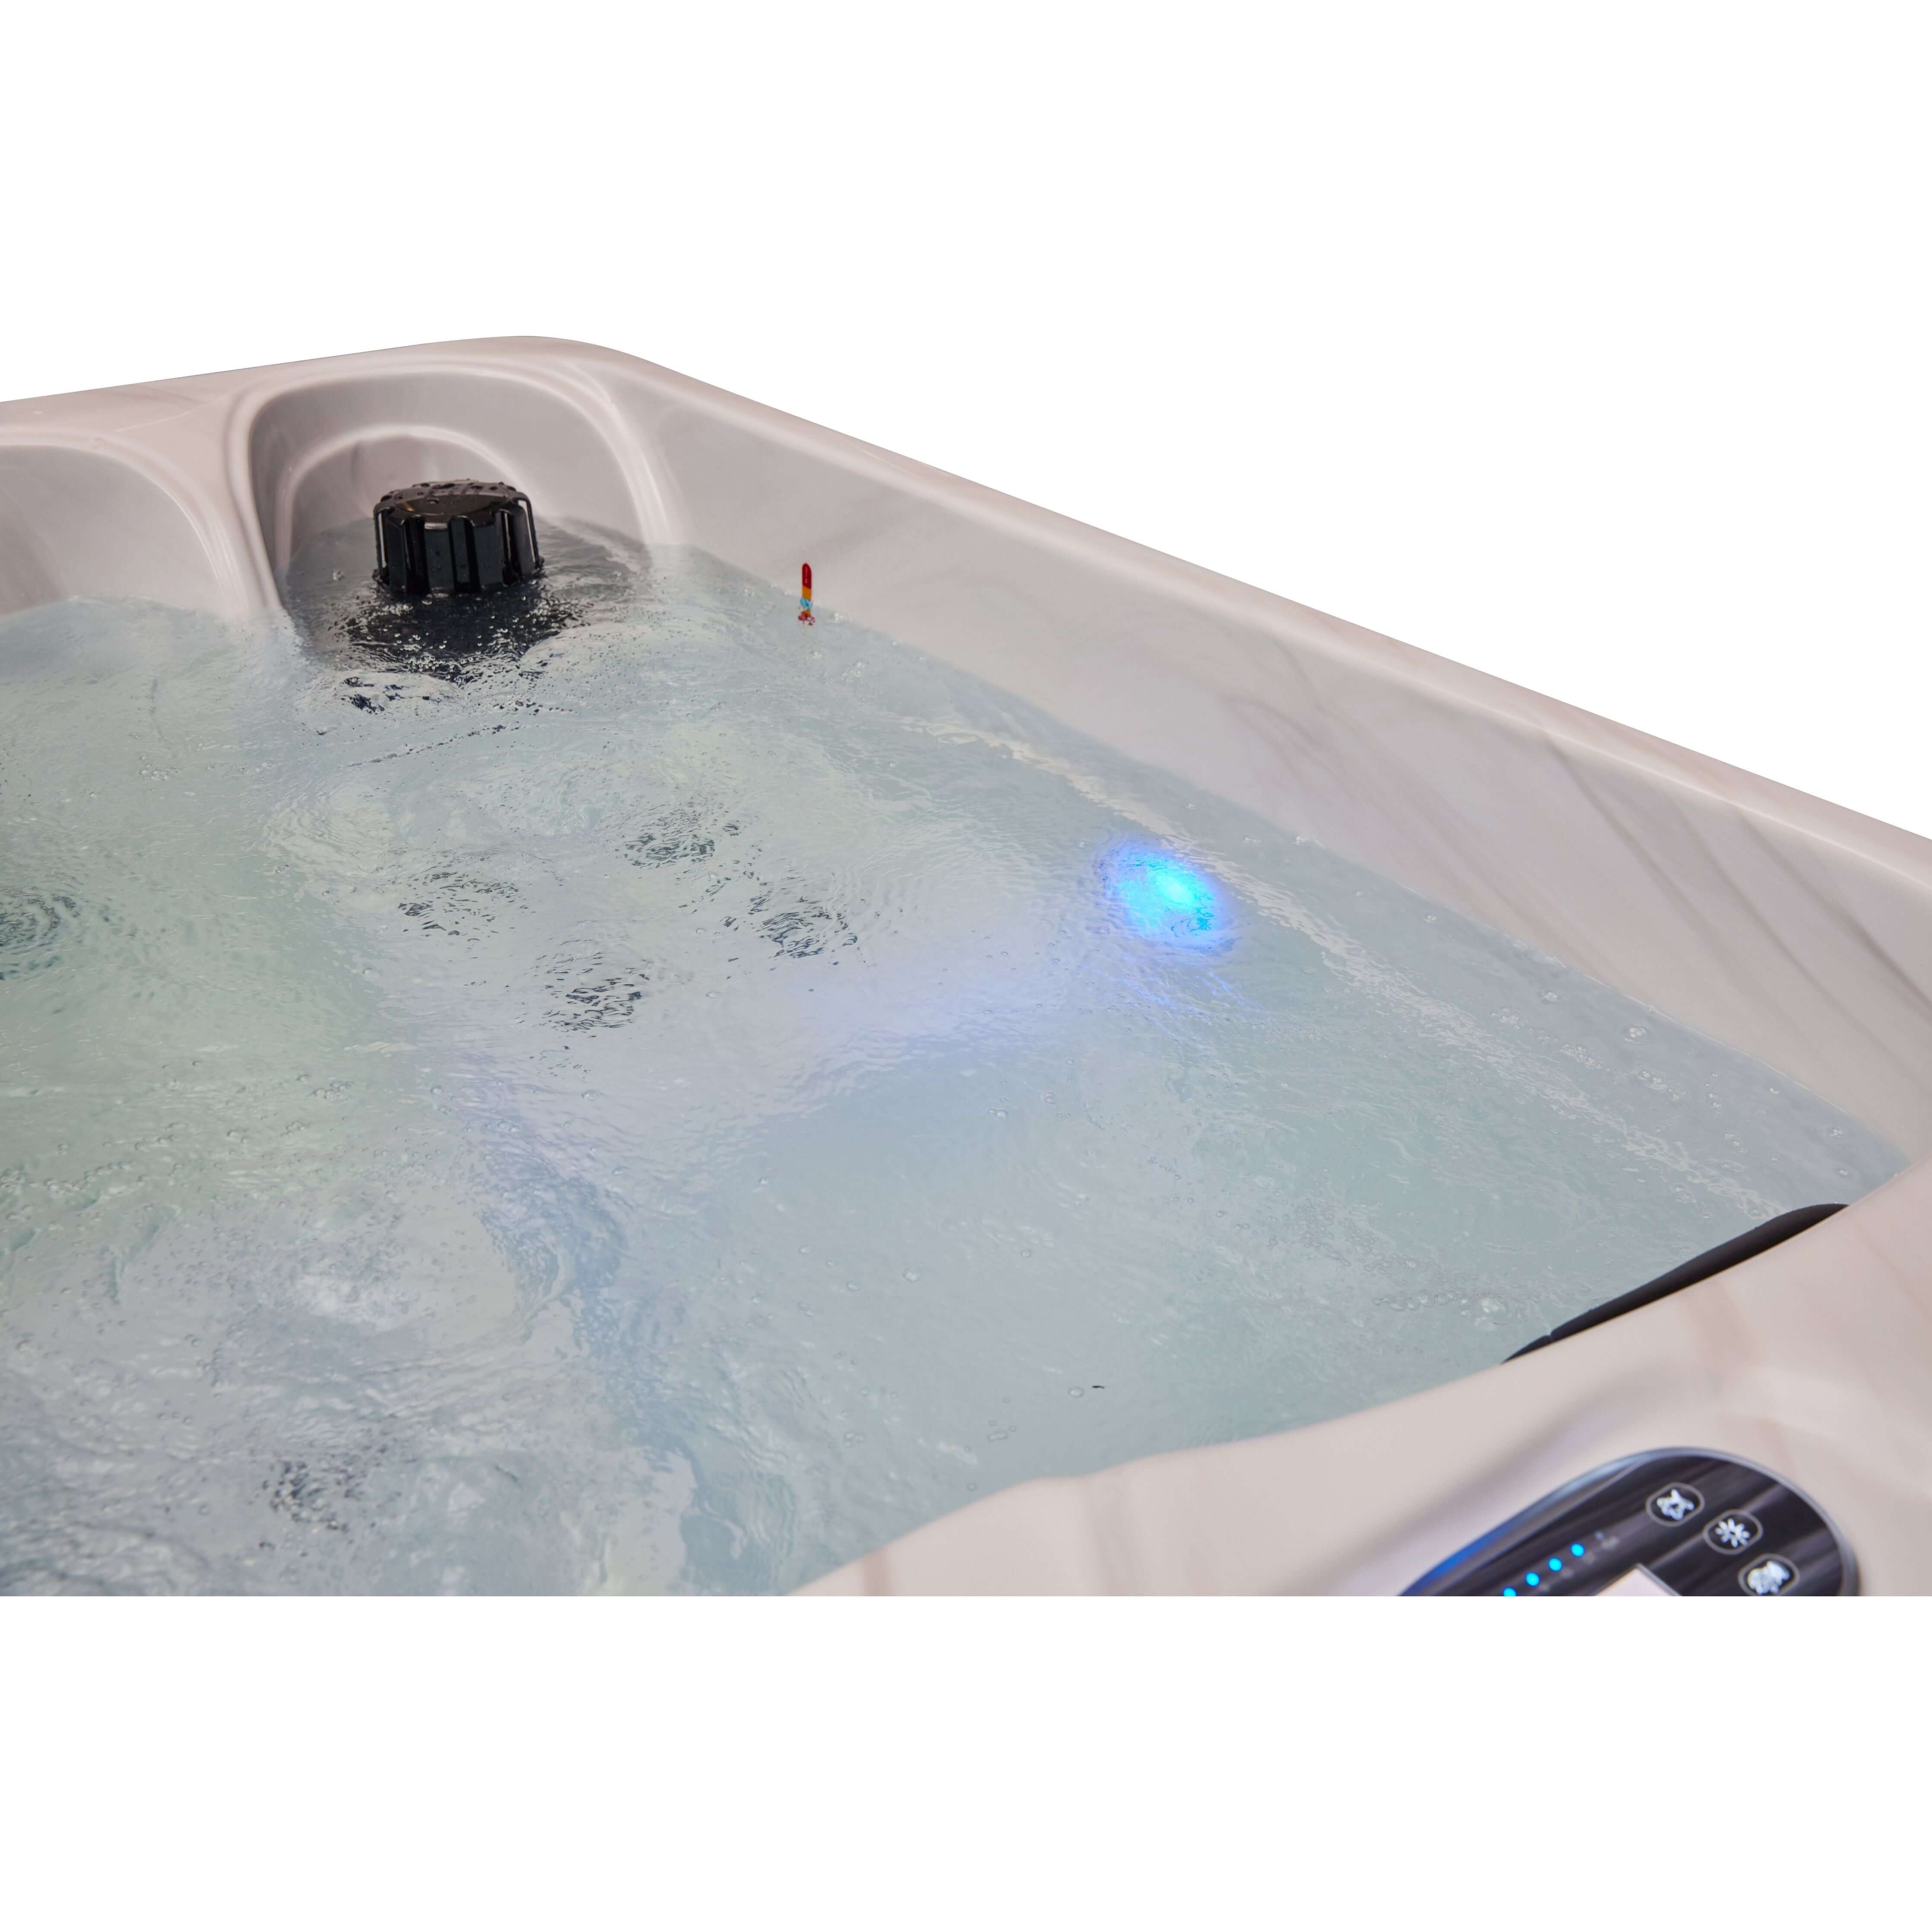 The CASHMERE 2-person Luxury Hot Tub